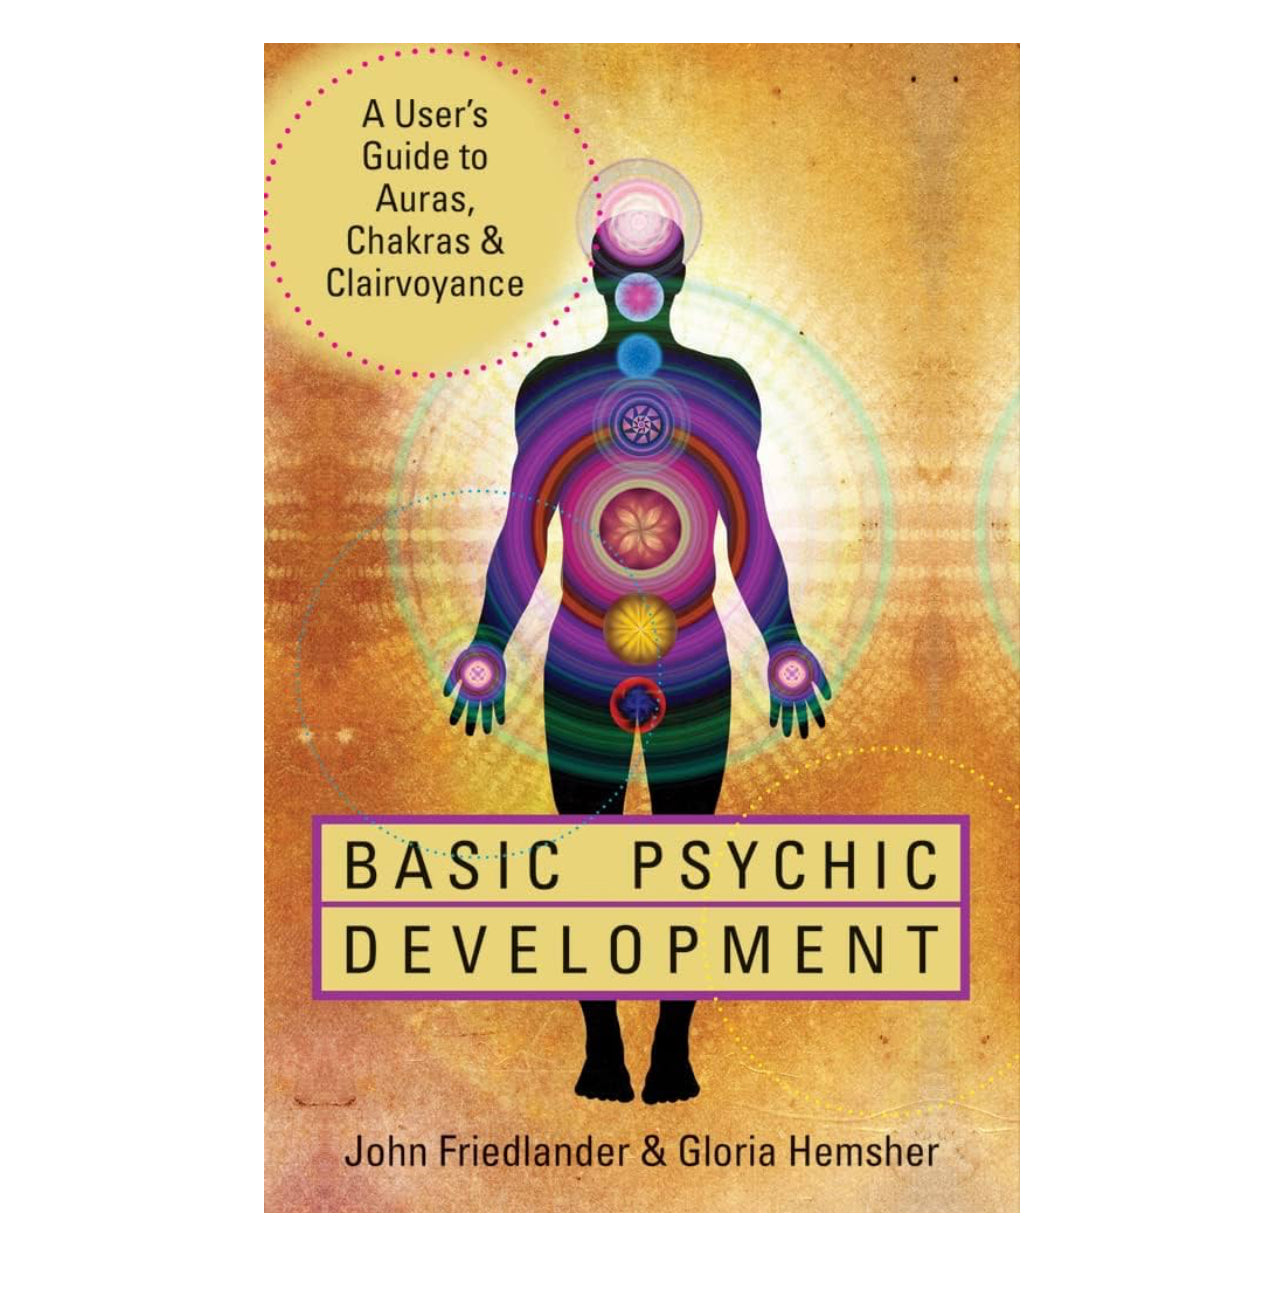 Basic Psychic Development: A User's Guide to Auras, Chakras & Clairvoyance